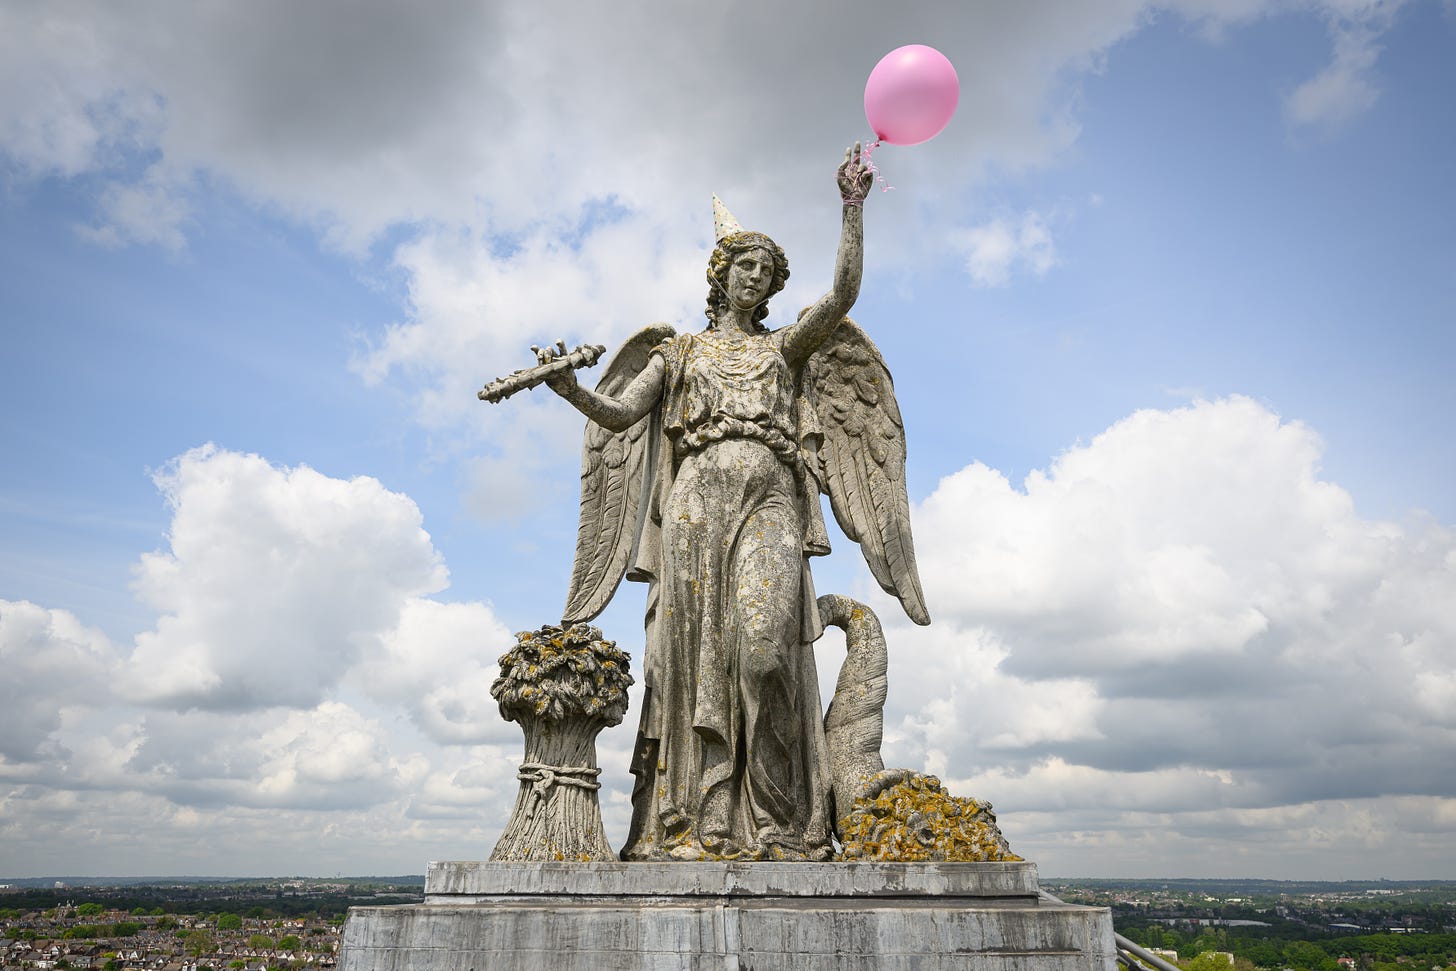 A birthday balloon and party hat is seen on the "Angel of Plenty" statue on the roof of Alexandra Palace on May 17, 2023 in London, England. (Photo by Leon Neal/Getty Images).